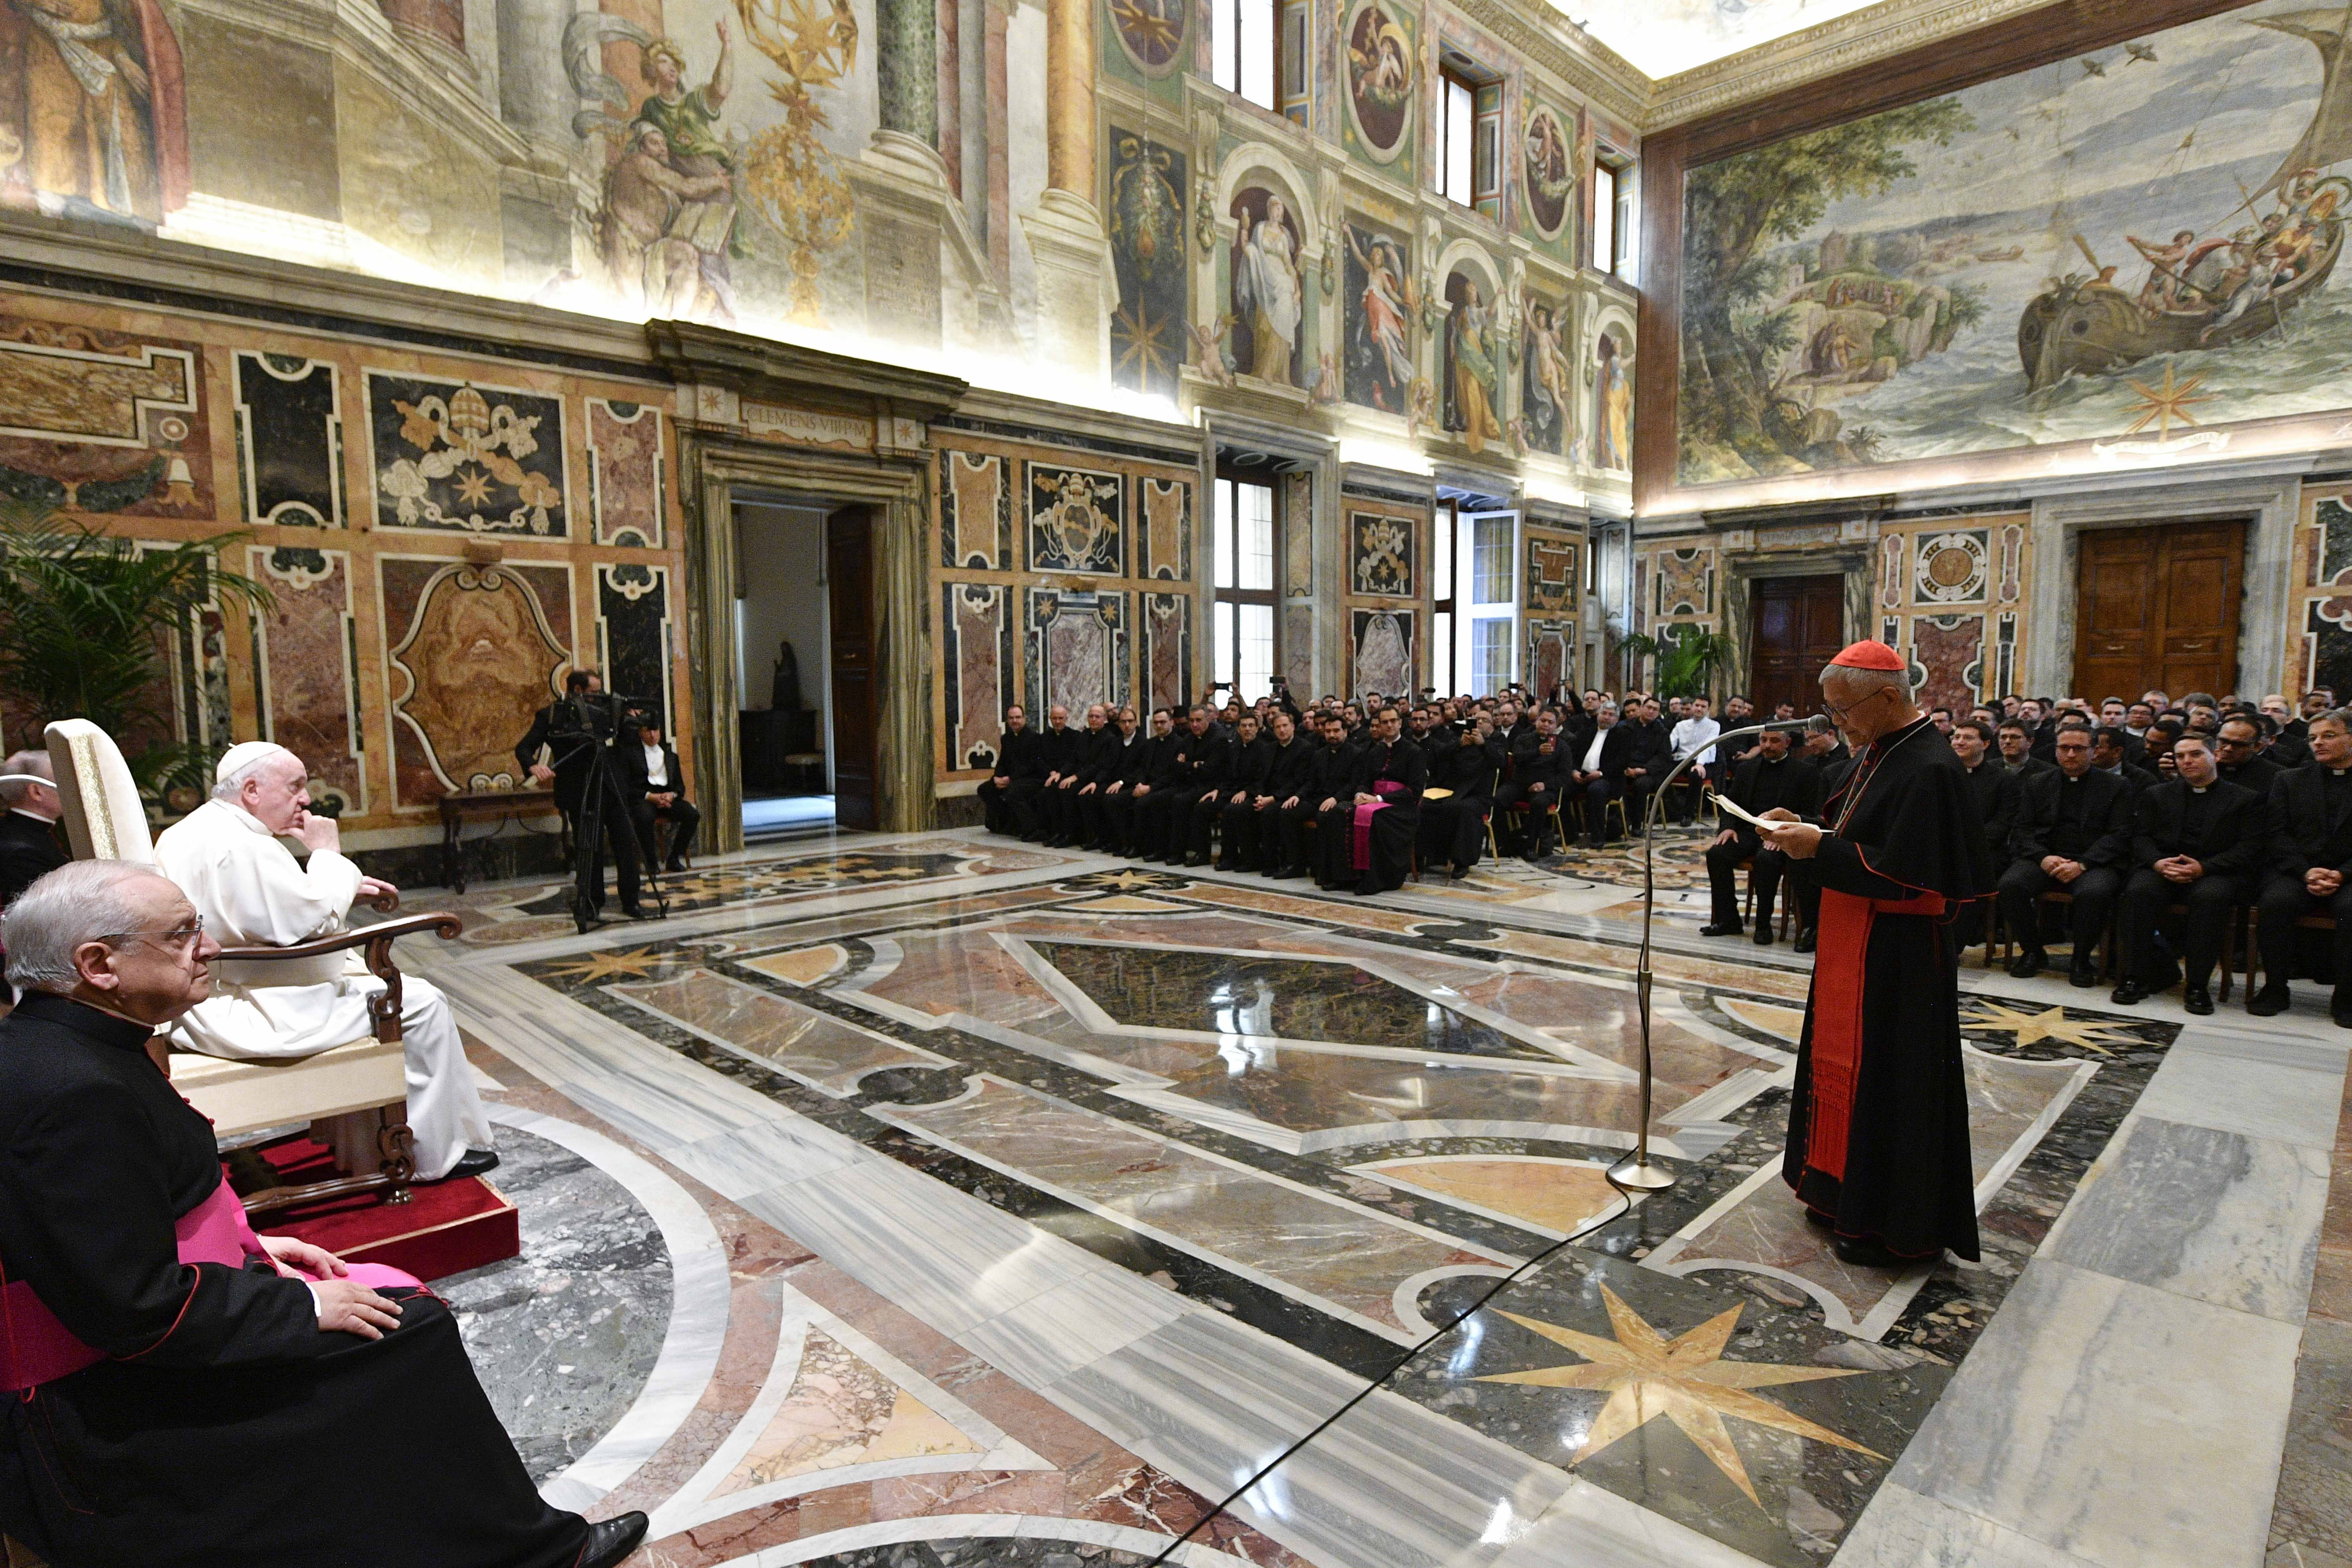 ‘Priestly formation at the heart of evangelization,’ Pope Francis tells seminary rectors